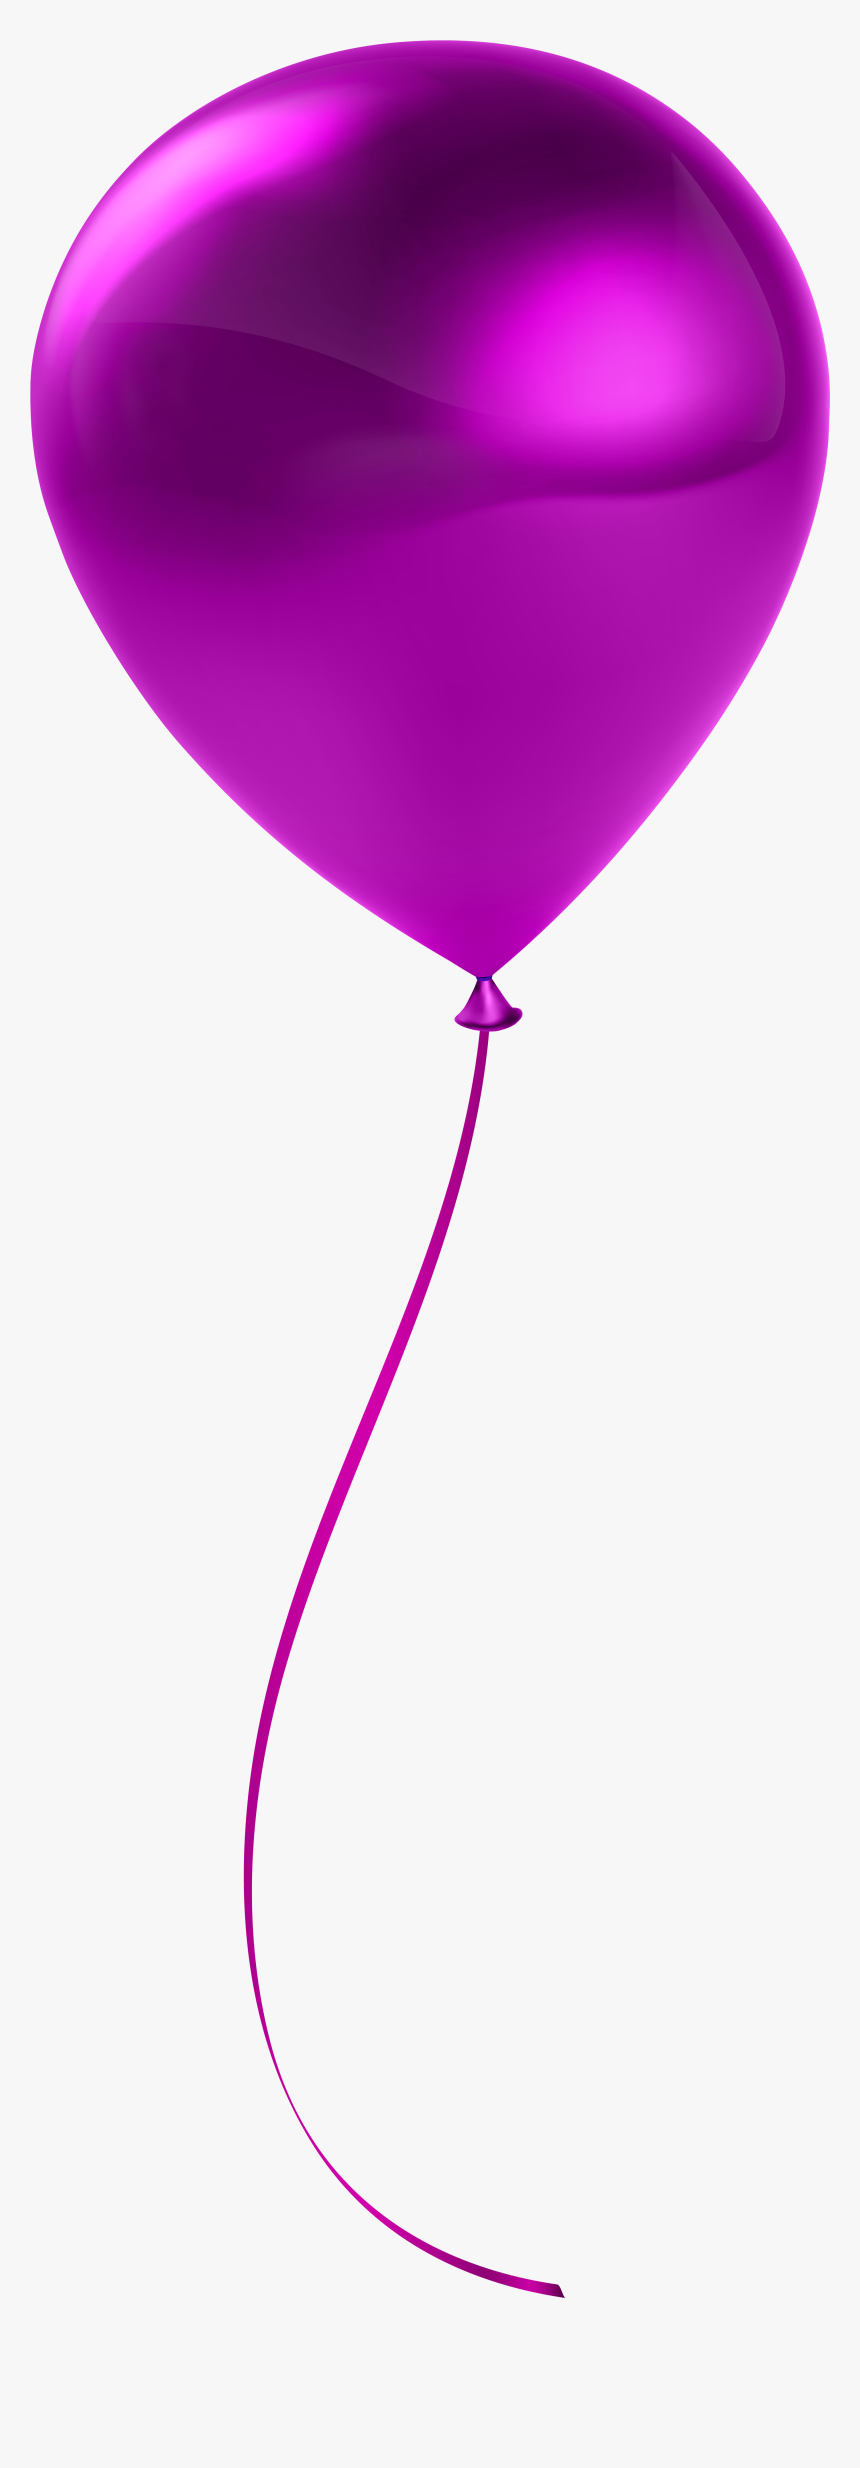 Single Balloon Images Png, Transparent Png, Free Download